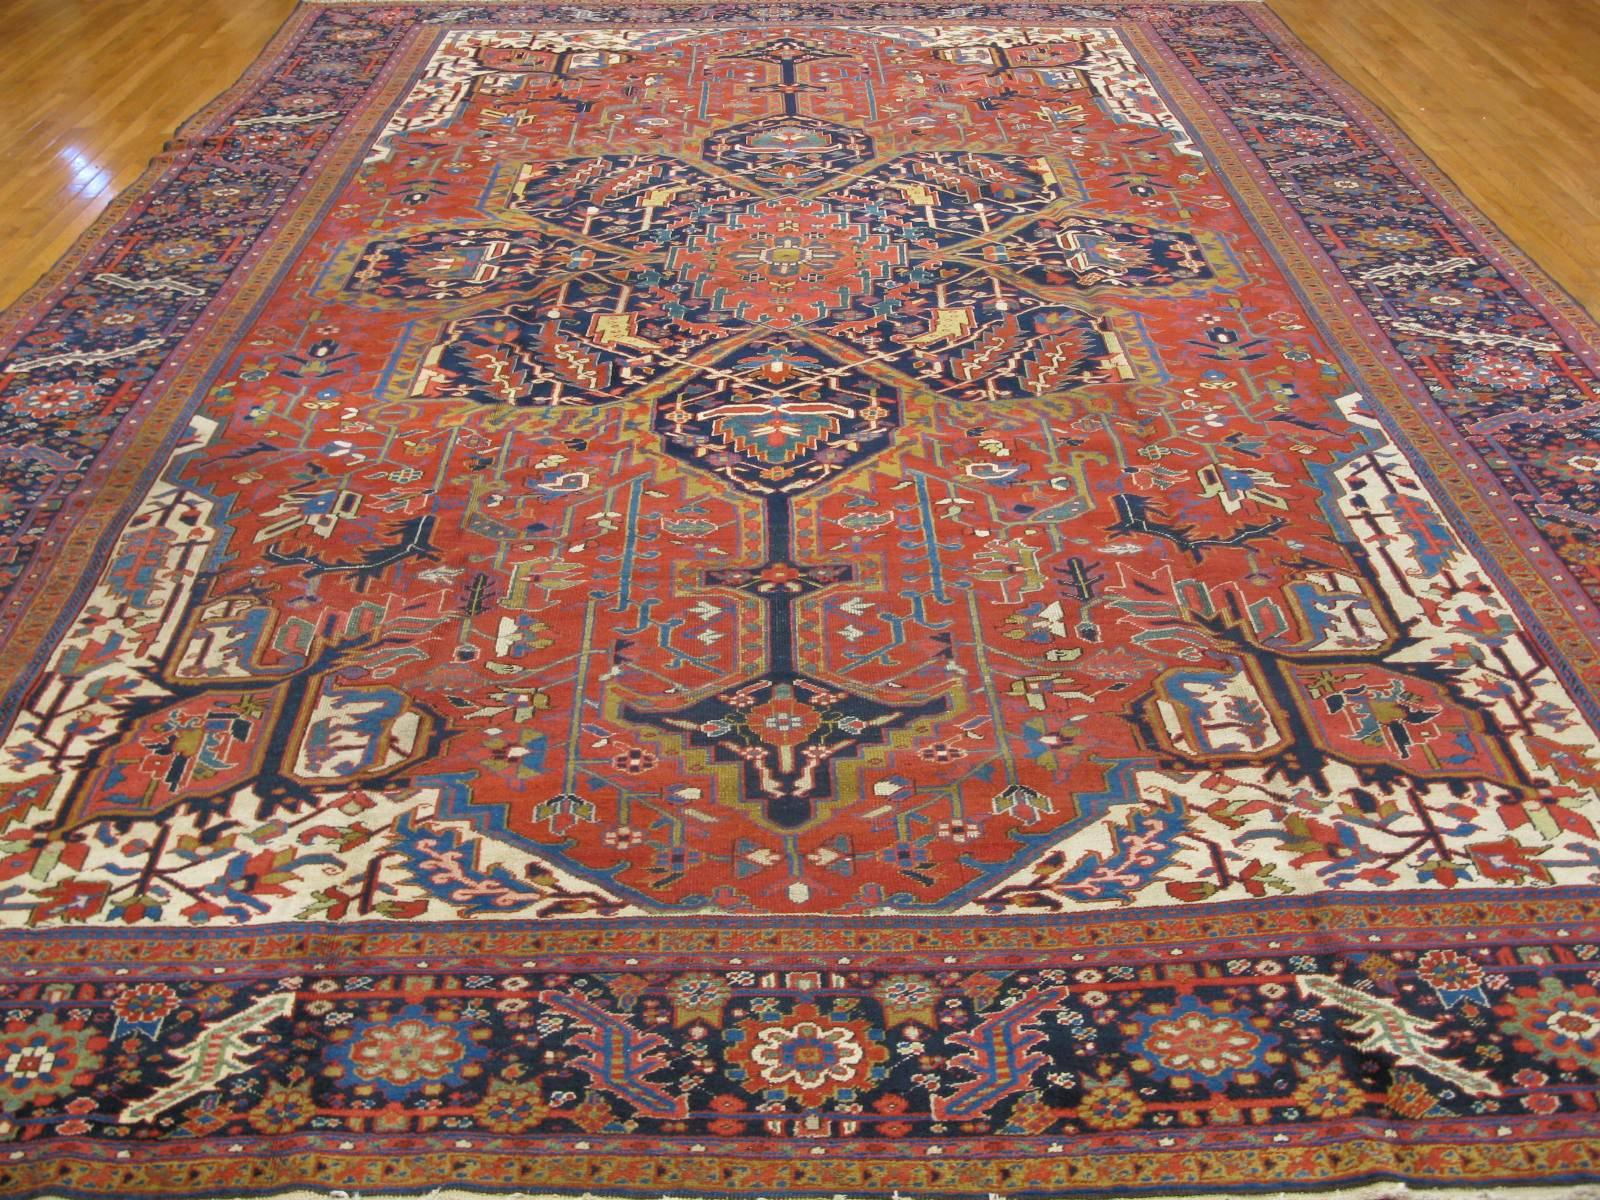 This is a beautiful large antique hand-knotted Classic Persian Heriz rug. Its rich color and distinct design would make a beautiful statement in any room. The rug measures 11' x 16' and in great condition.
     